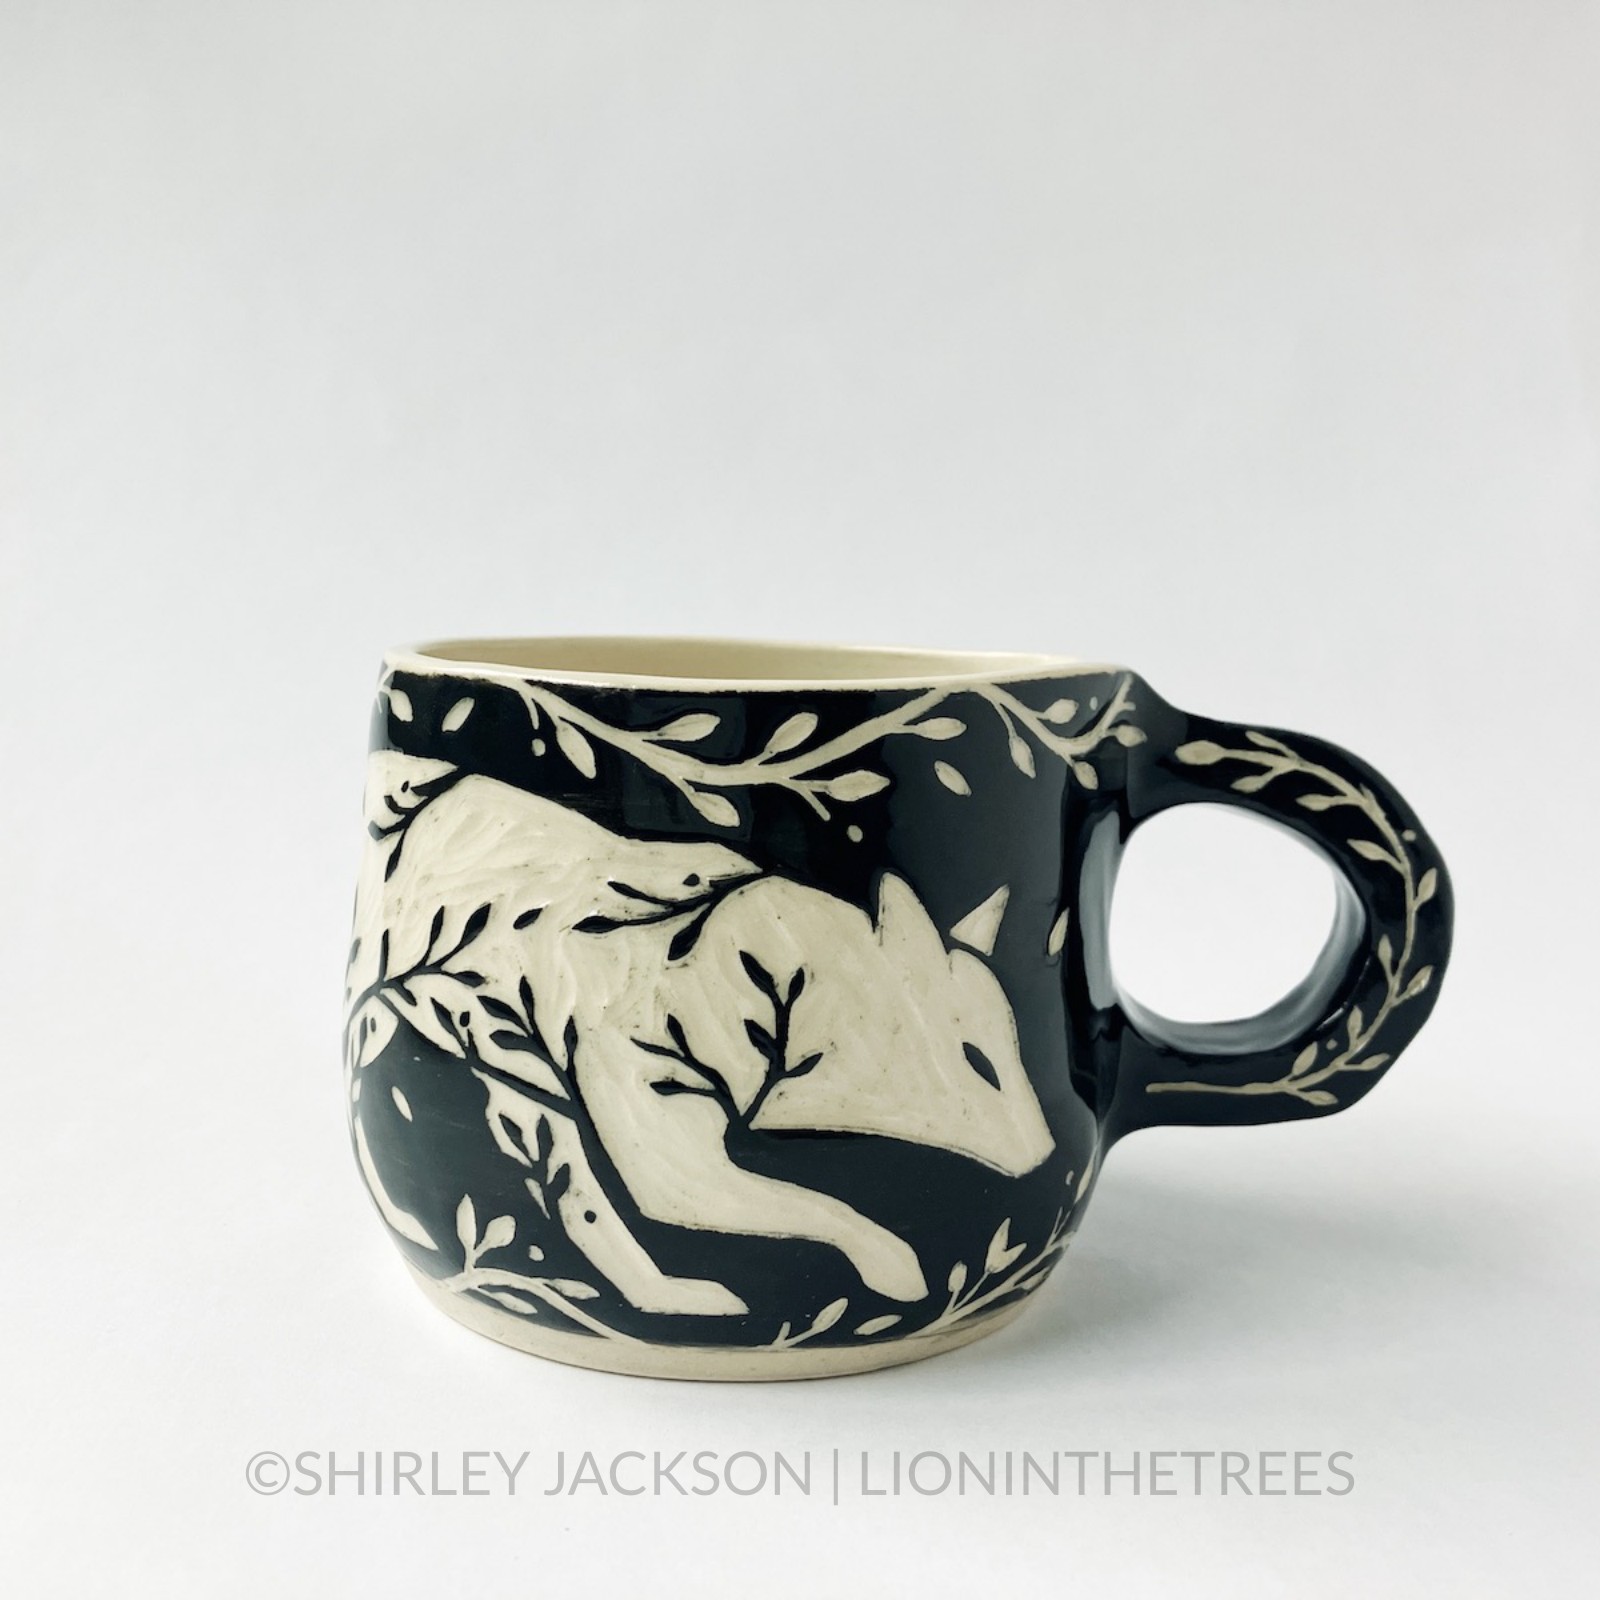 Ceramic black sgraffito mug featuring my Running Fox motif. This mug also features a floral border above and below the fox motif.